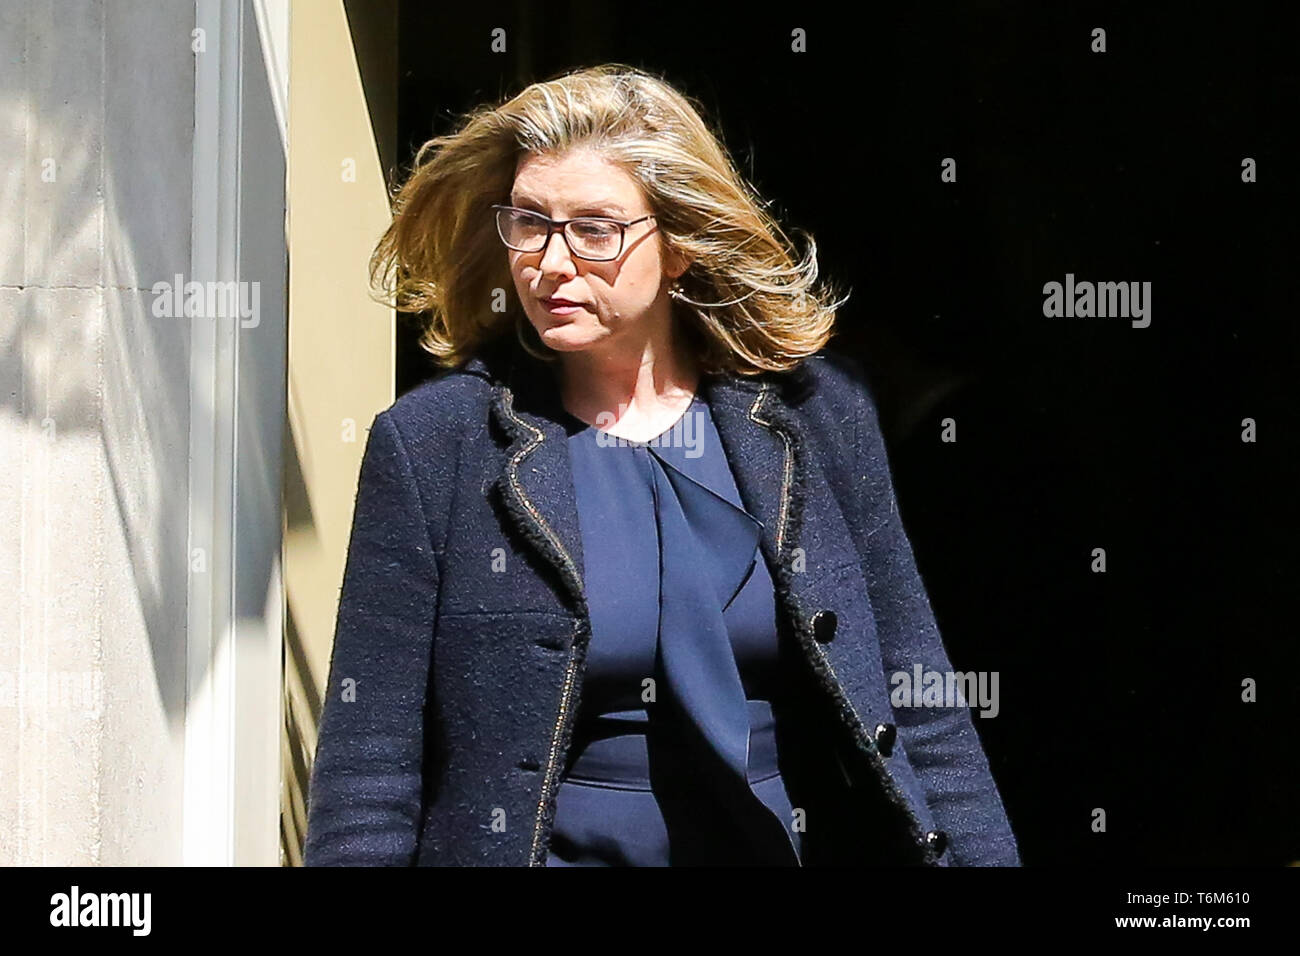 Penny Mordaunt has been appointed as Secretary of State for Defence after the British Prime Minister Theresa May sacked Gavin Williamson over Huawei leak following an inquiry into the leak of information from the National Security Council.  Penny Mordaunt becomes the first Defence Secretary. Stock Photo